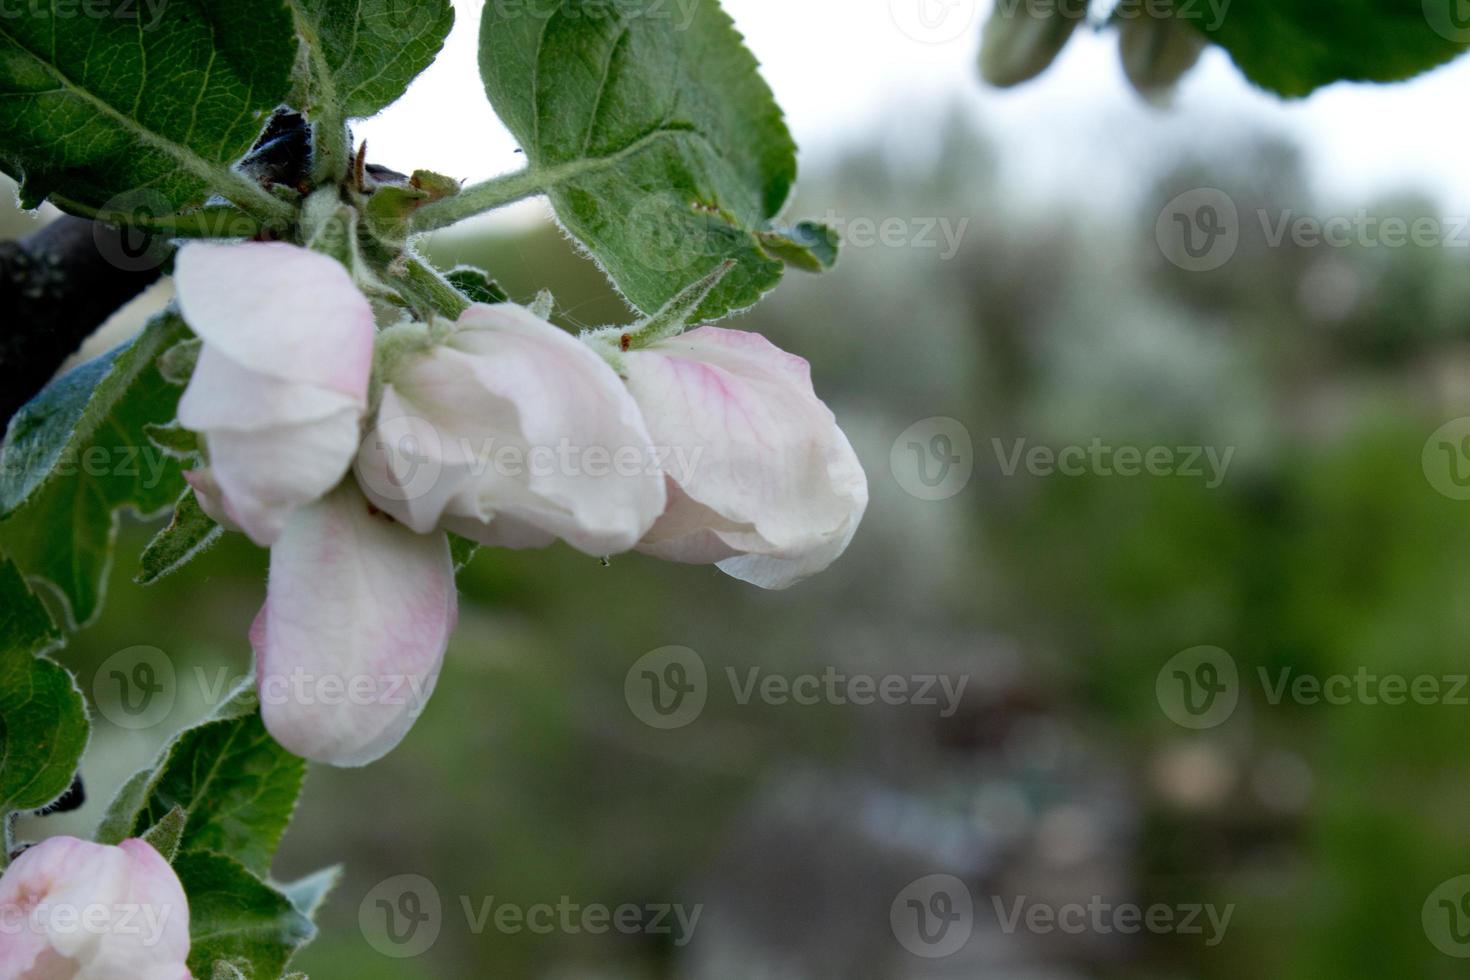 Pink and white apple blossom flowers on tree in springtime photo